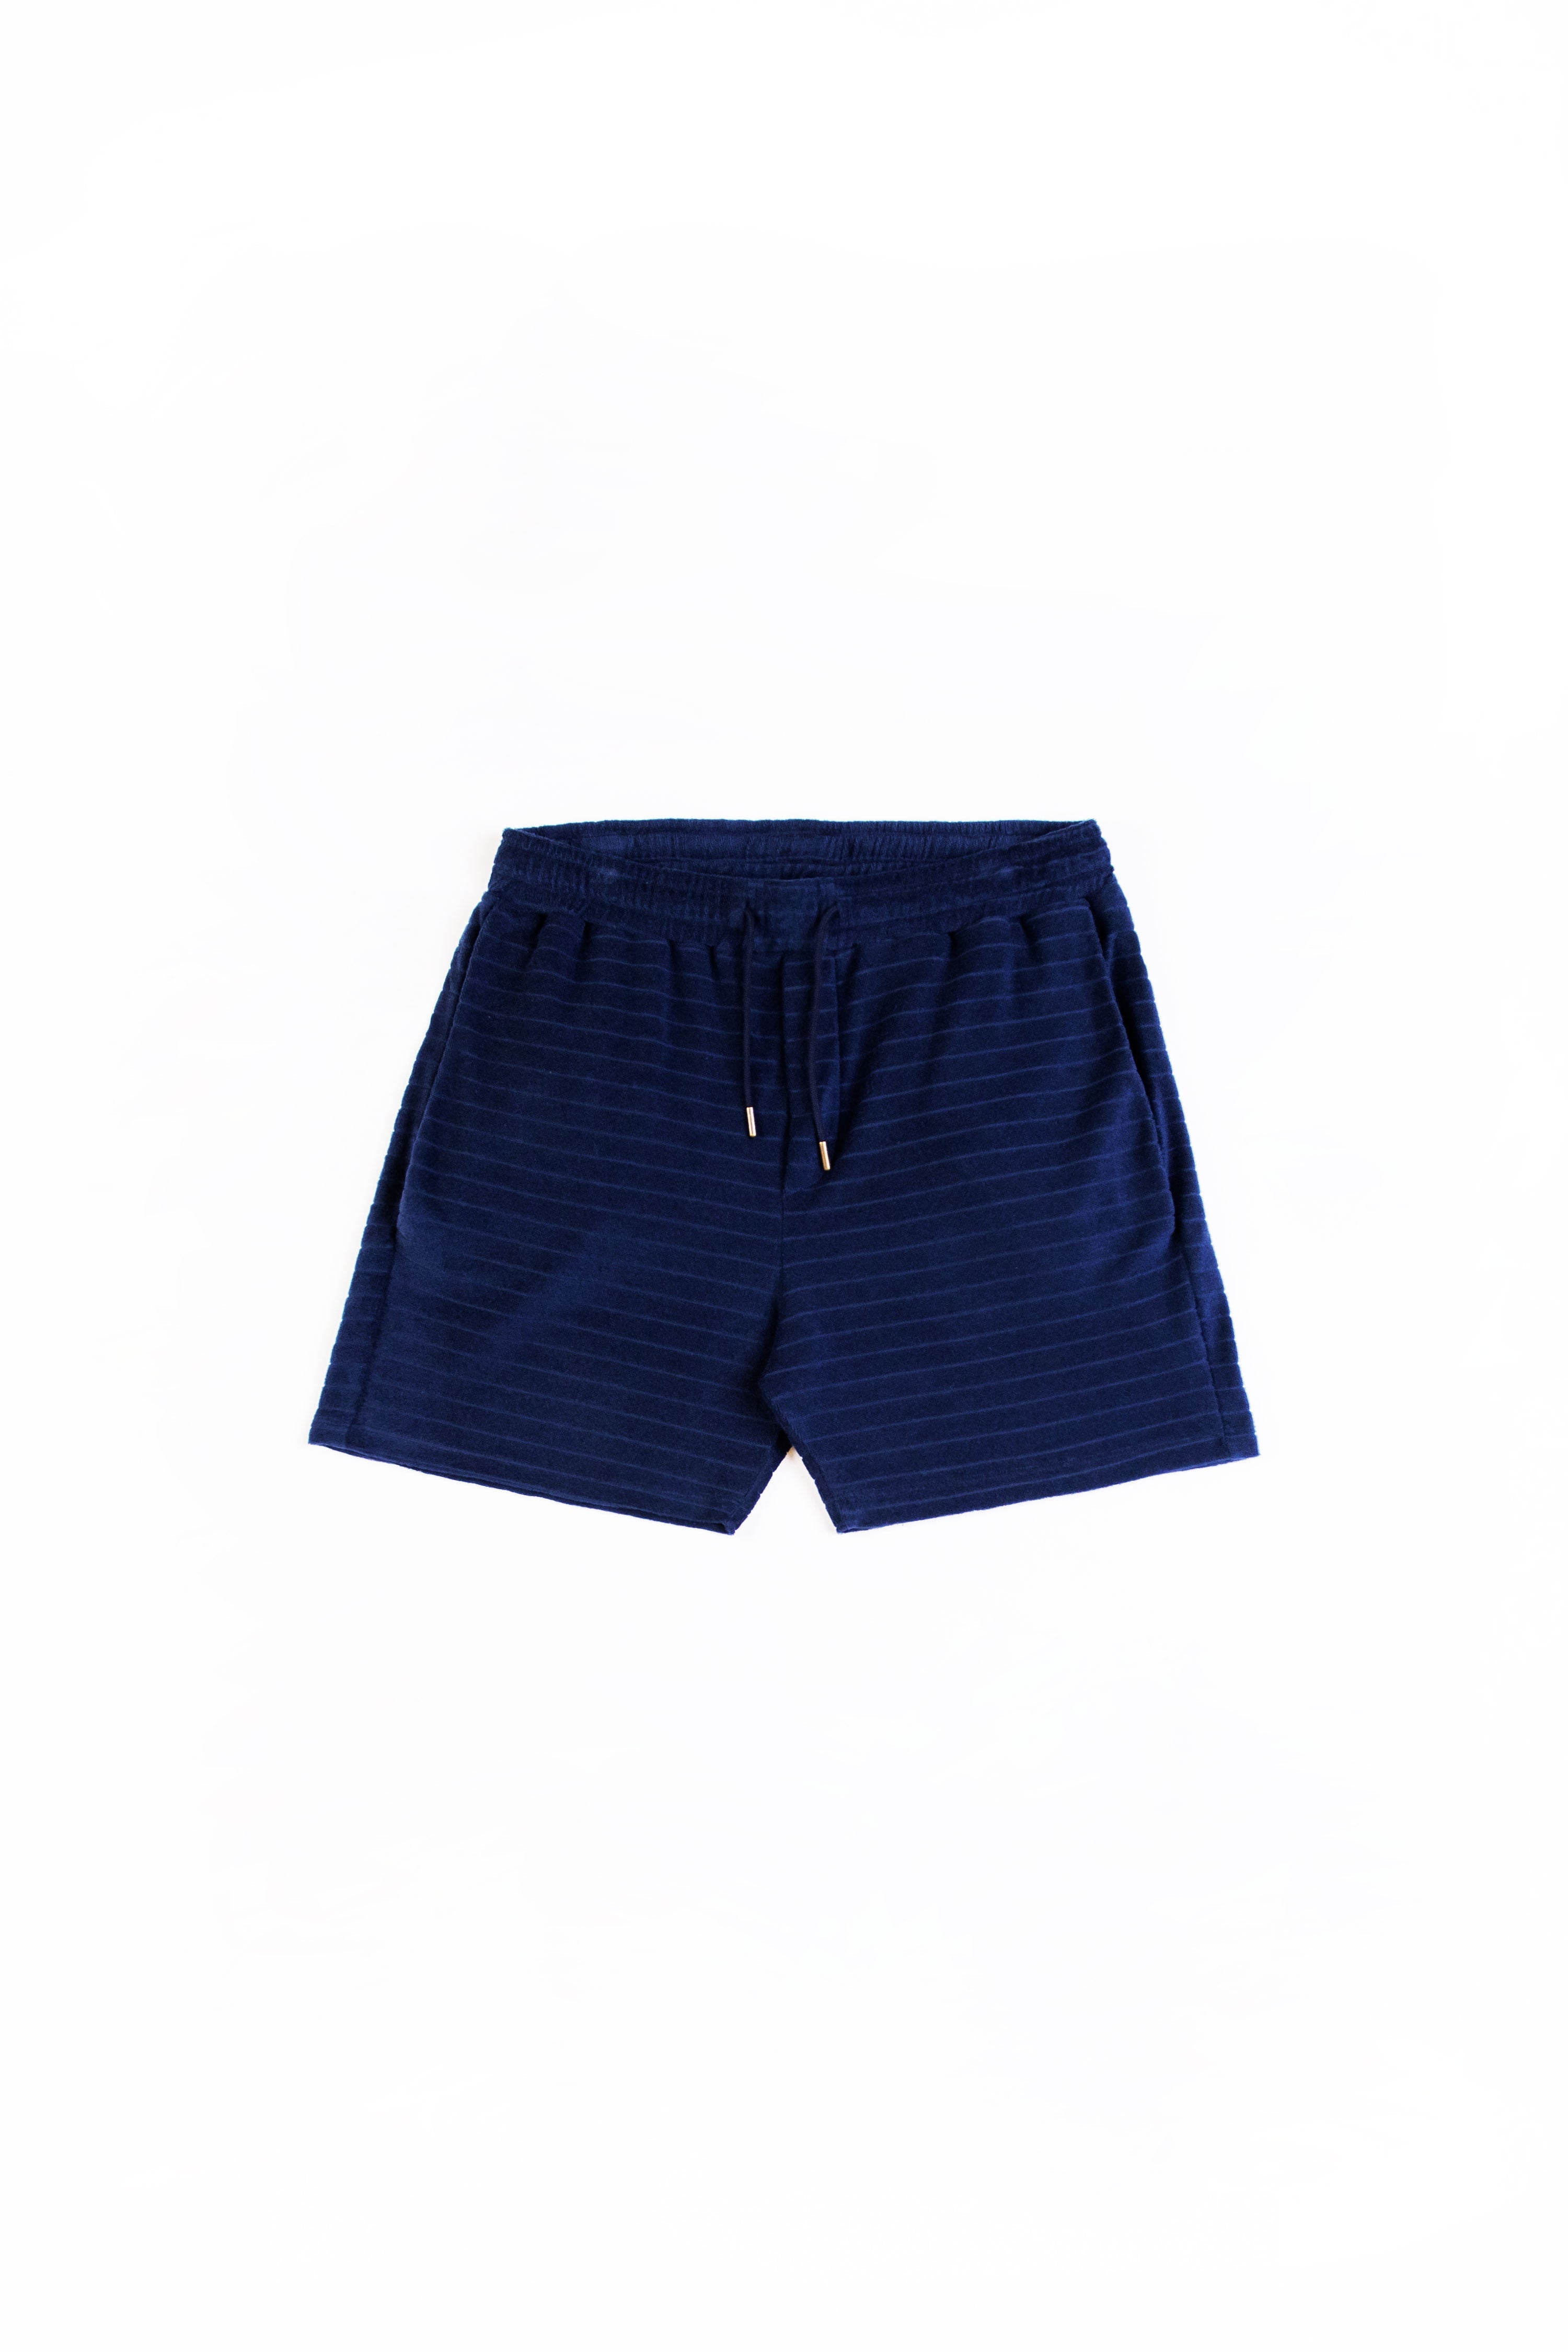 Dark blue sweat shorts made from 100% organic cotton from Rotholz